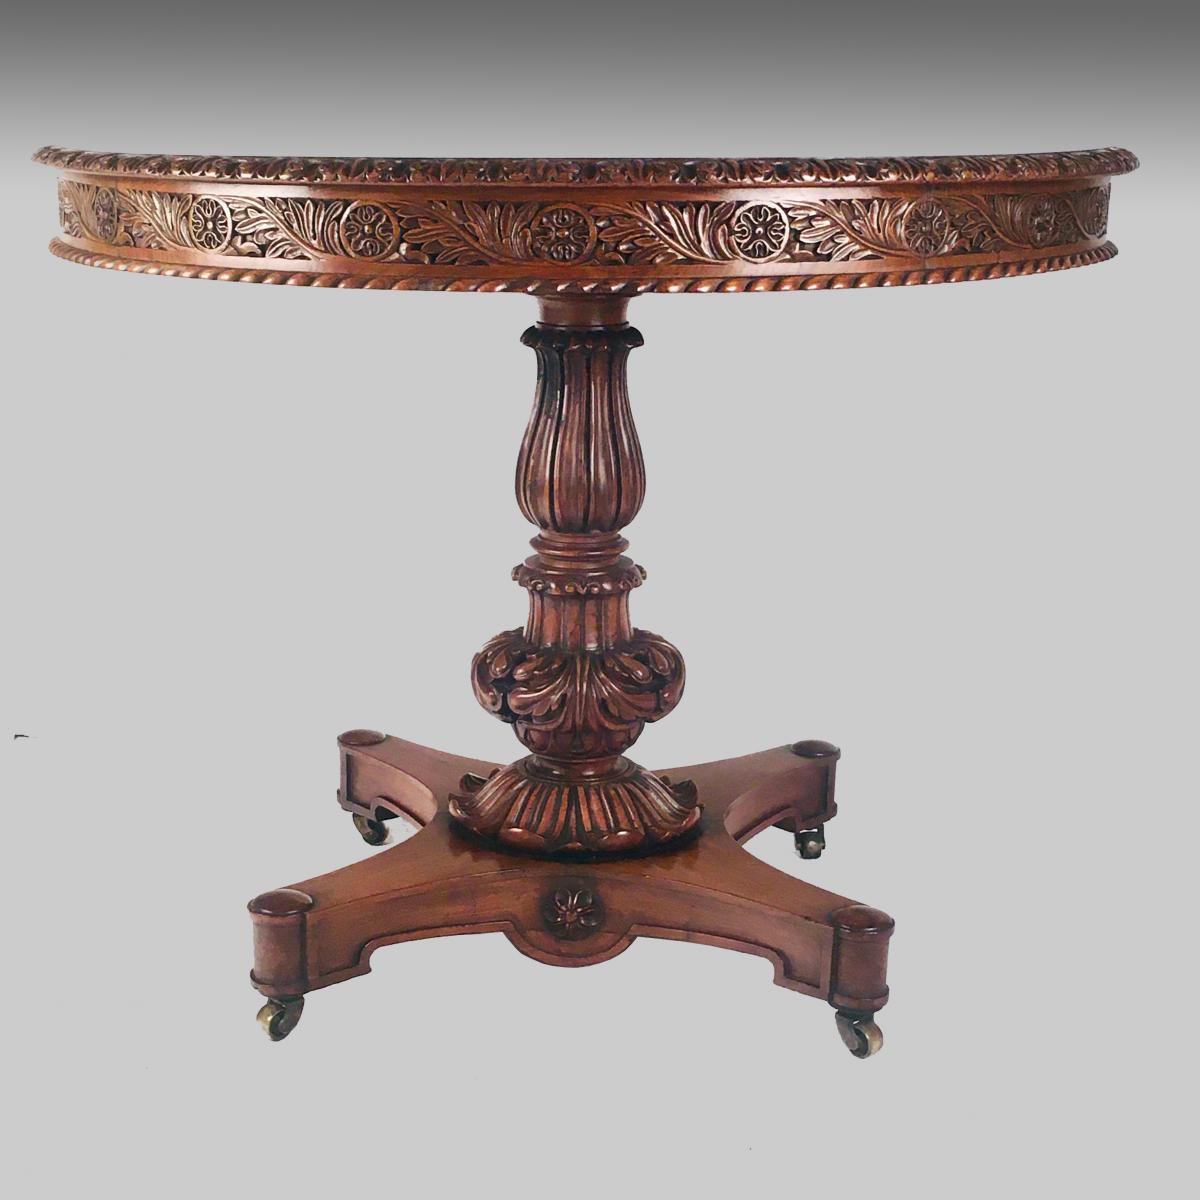 19th century Anglo-Indian rosewood centre table